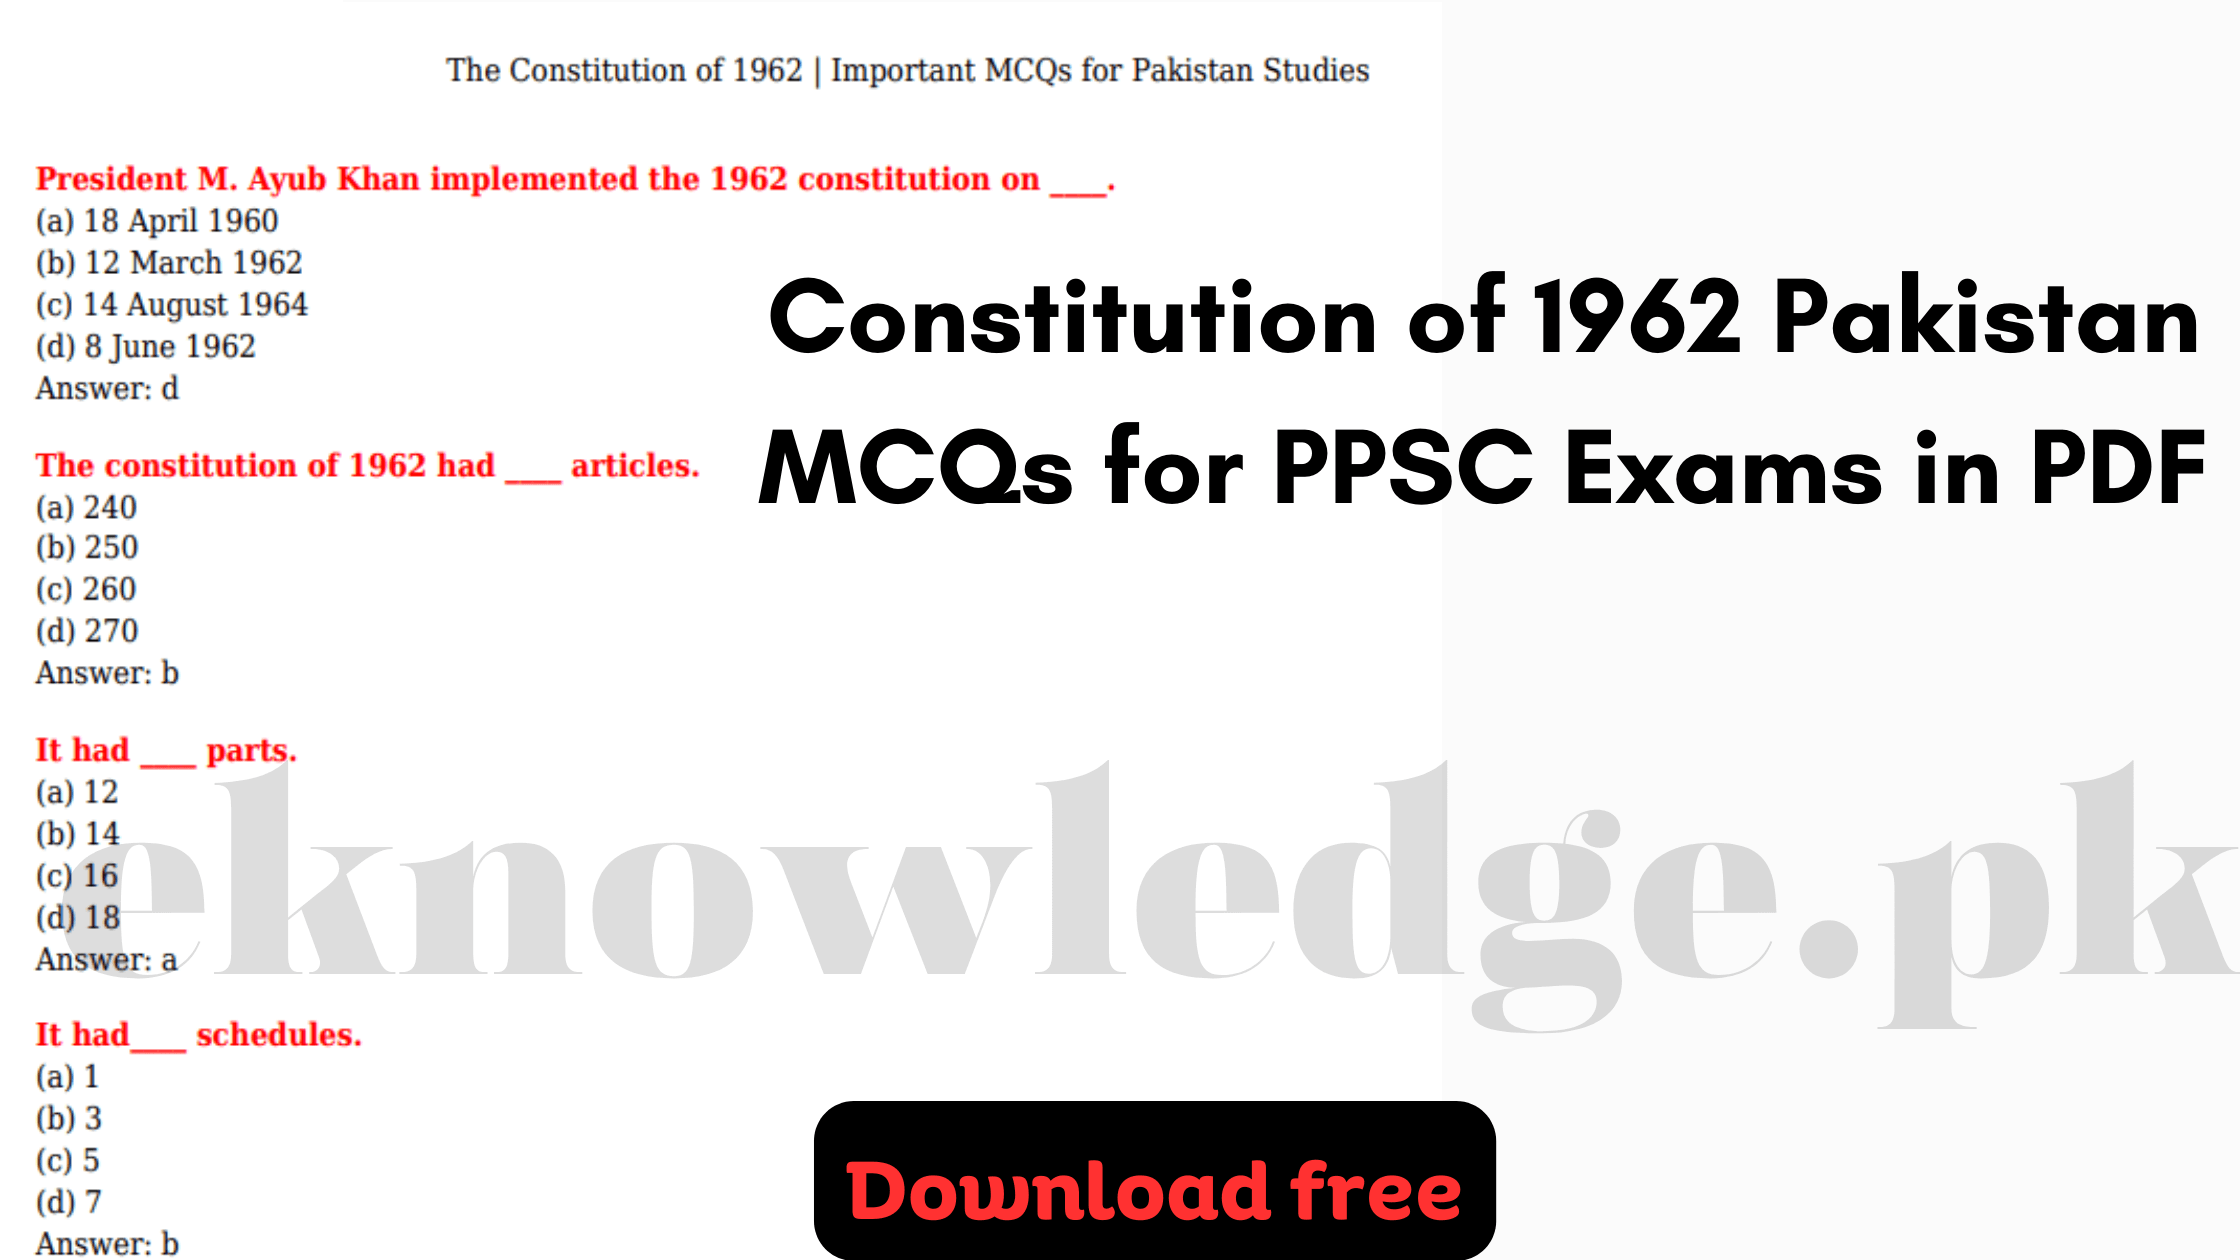 Constitution of 1962 Pakistan MCQs for PPSC Exams in PDF